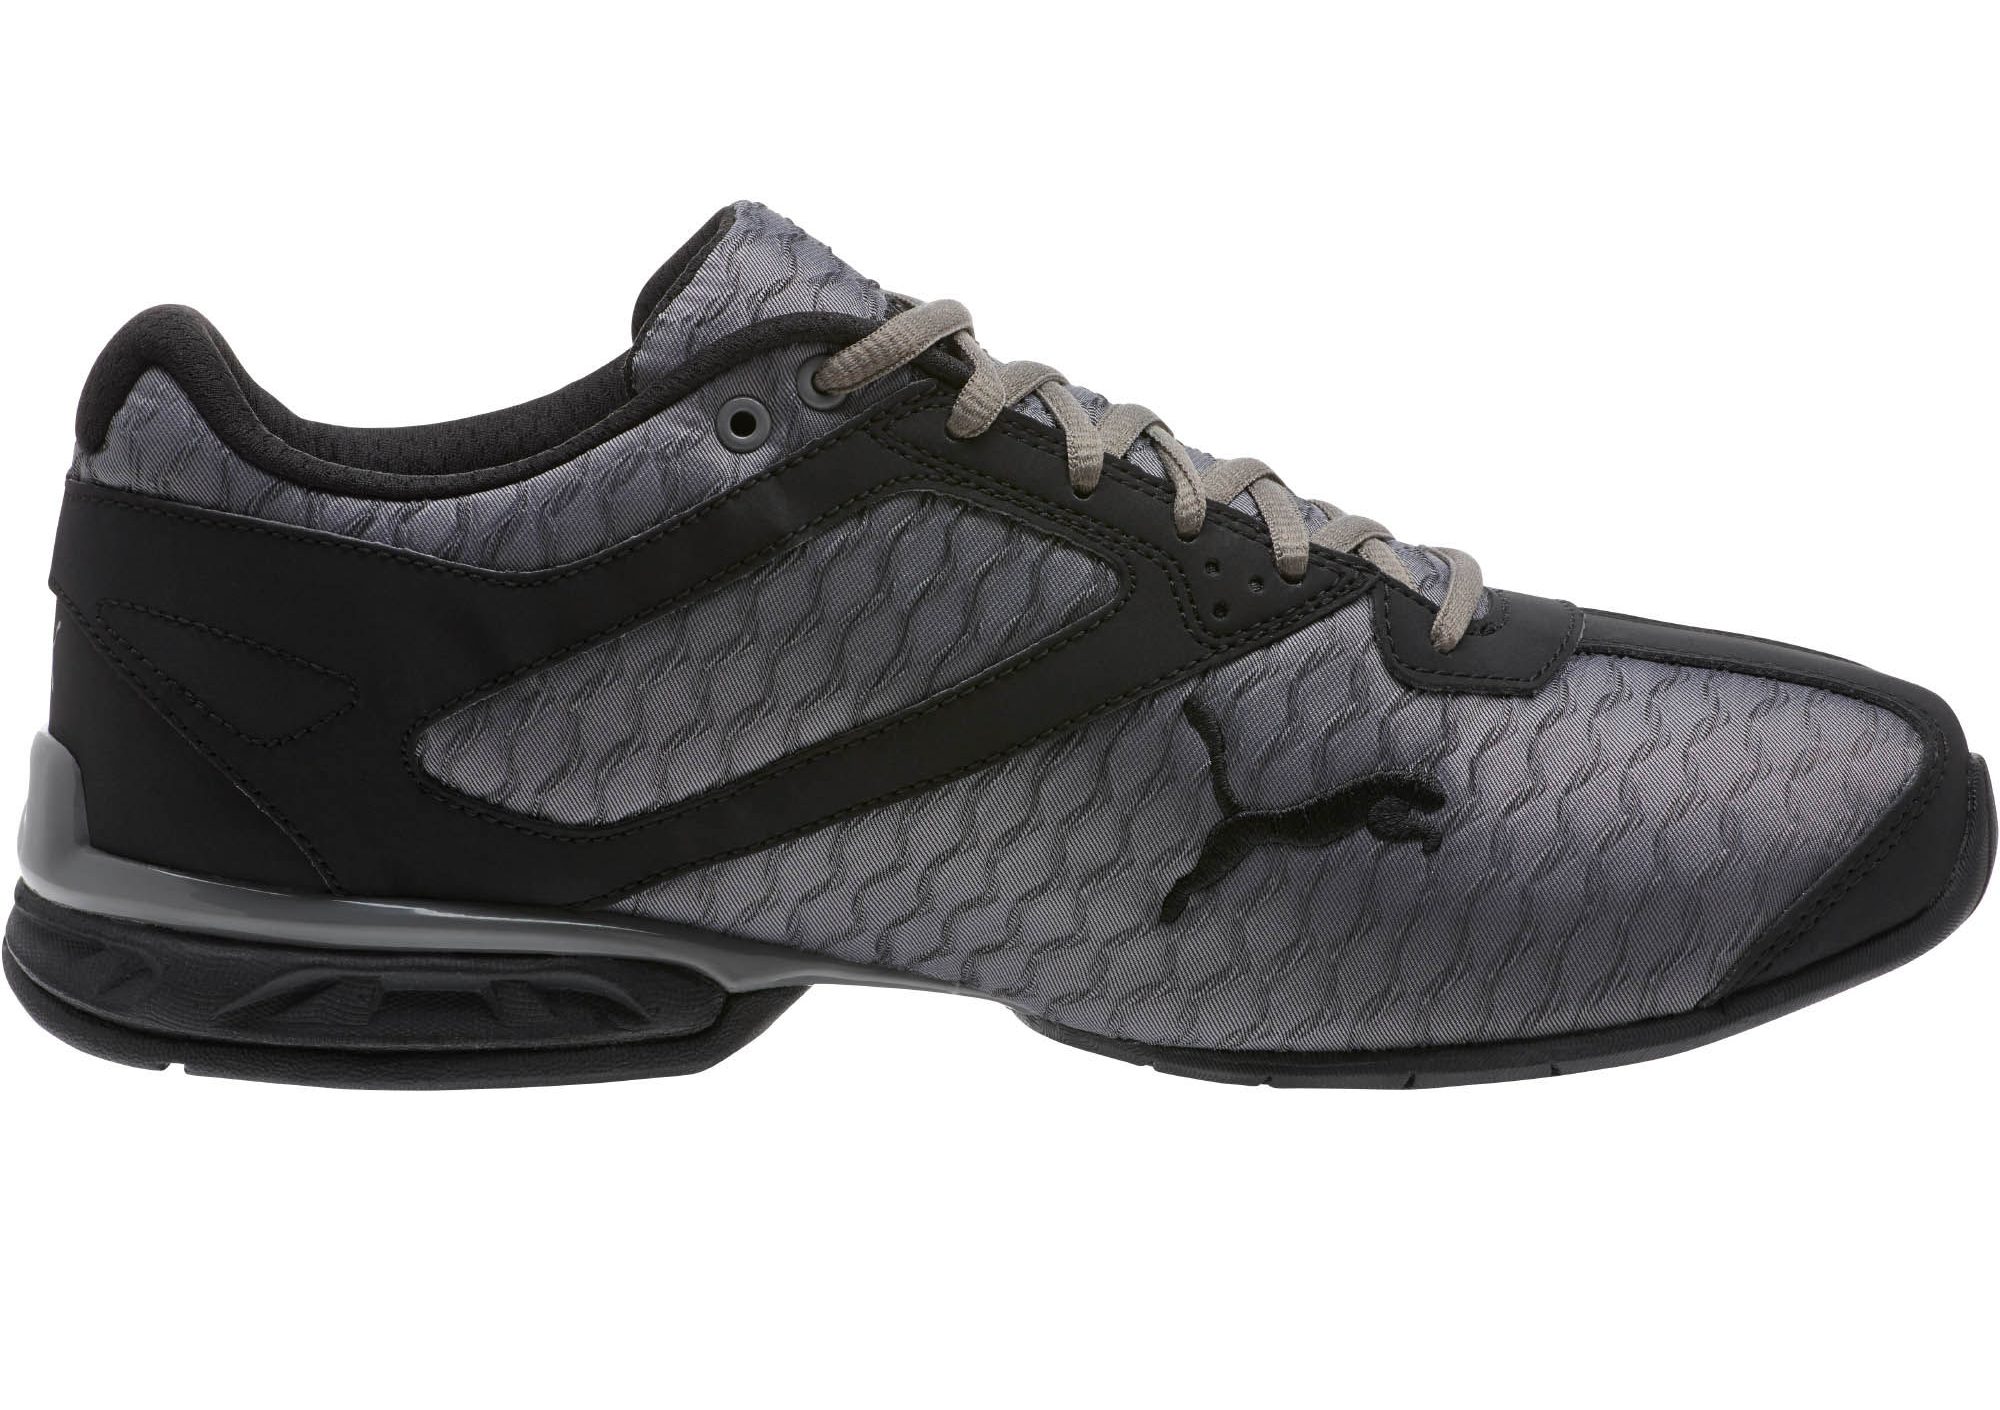 PUMA Tazon 6 3D Men’s Running Shoes Now Just $44.99!